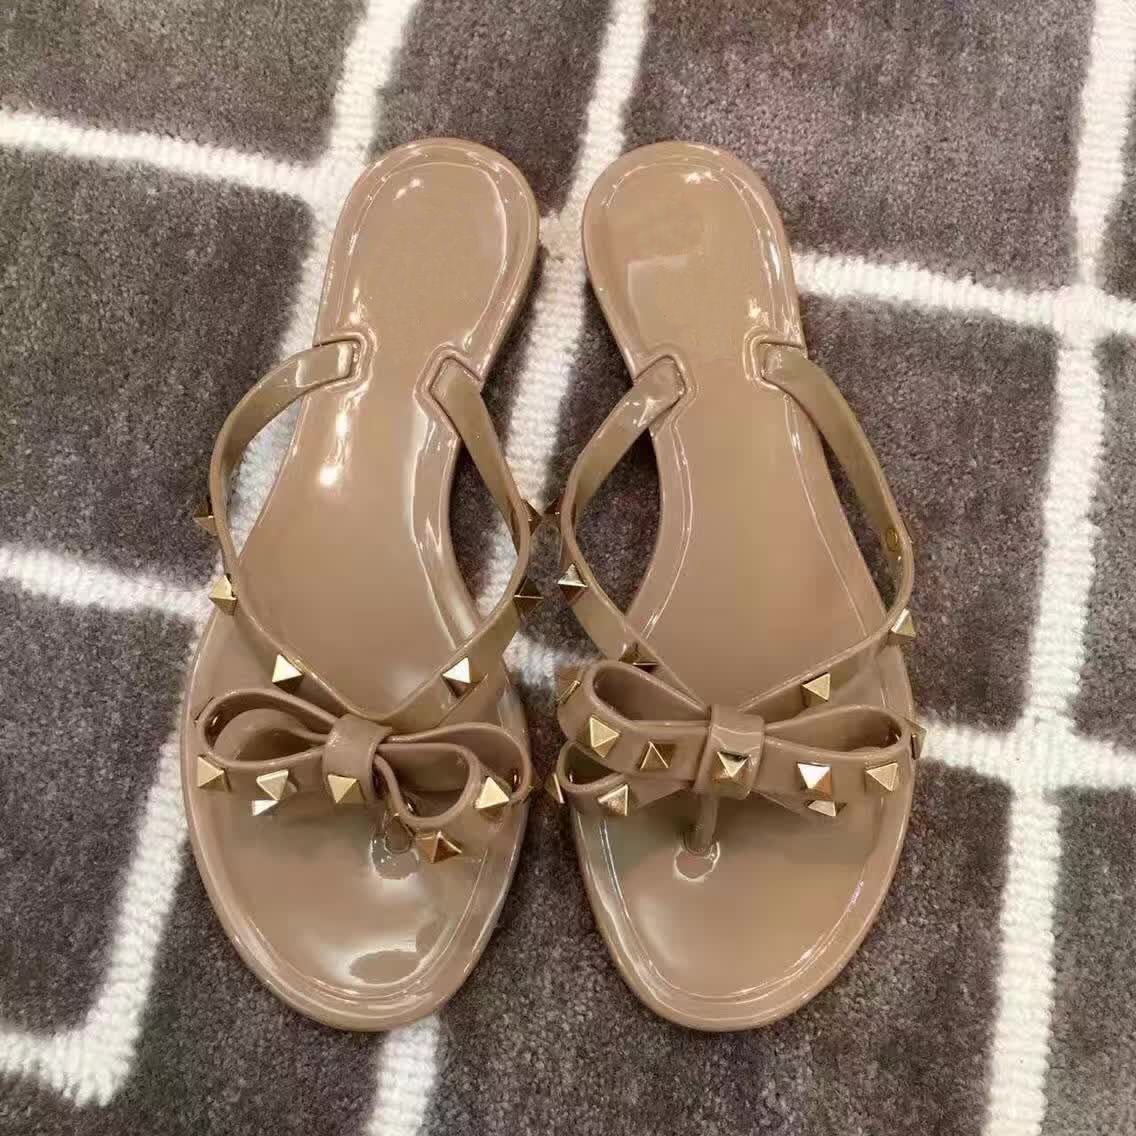 With Rivet Summer,Women Flops,Sandals,Beach Shoes,Woman Slippers.,Jelly From Mandy86, $57.32 DHgate.Com